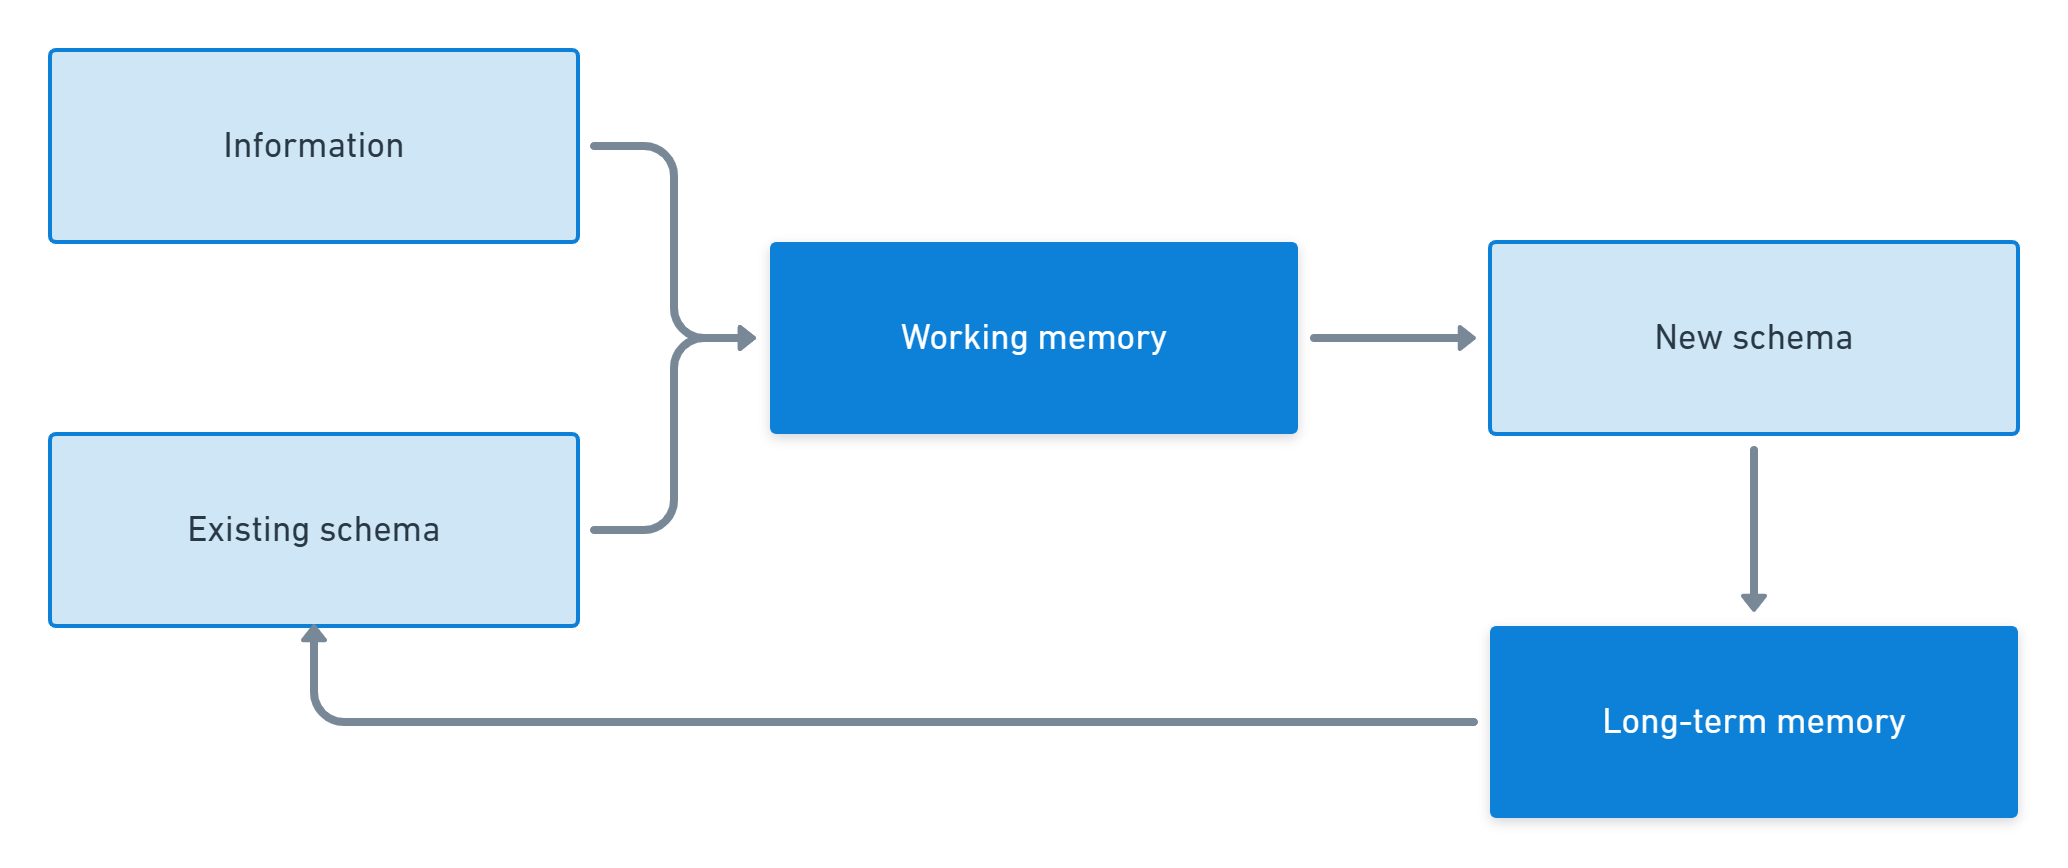 Information and existing schemas are brought into working memory and processed into new schemas that are stored in long-term memory